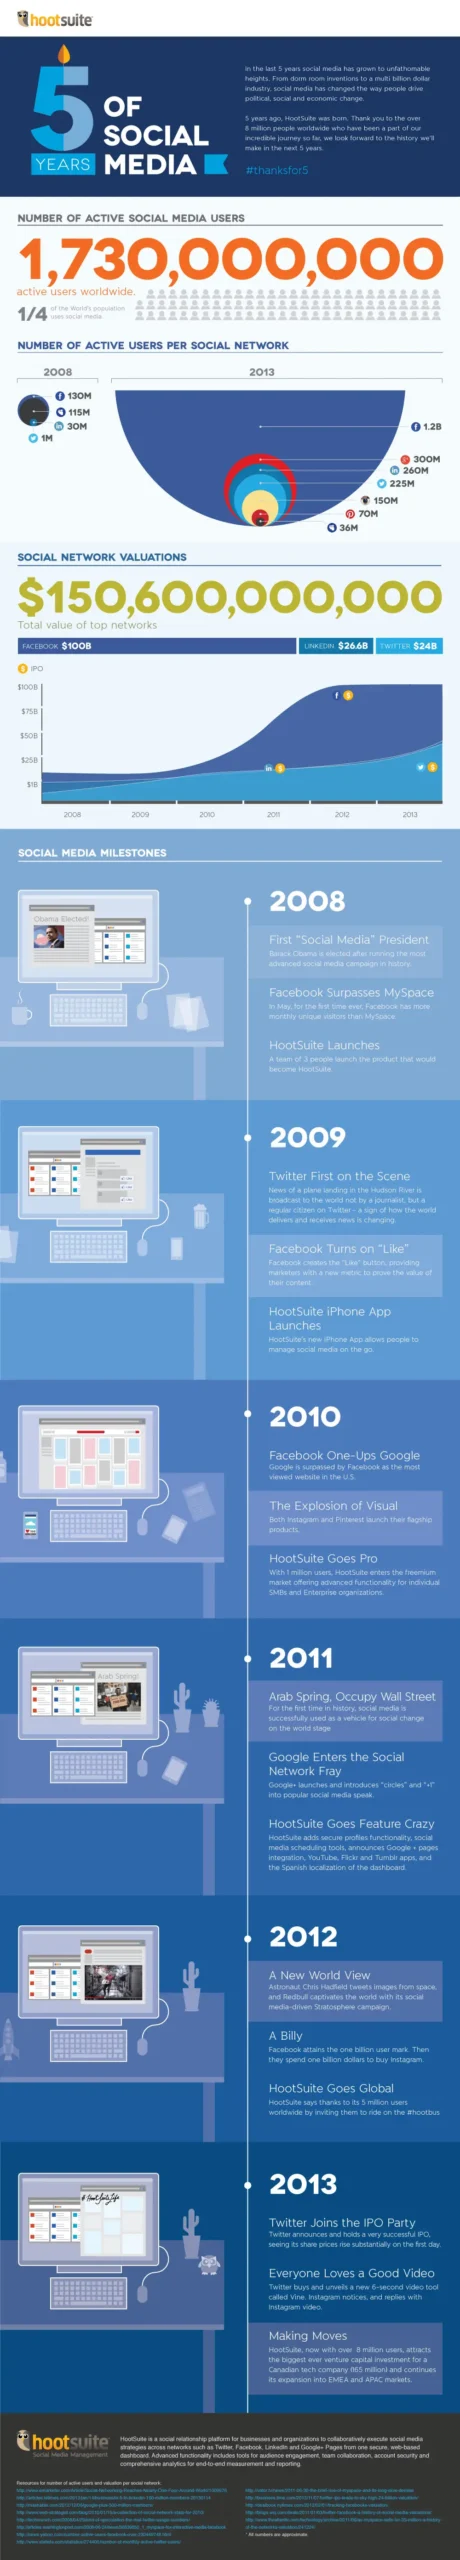 5 Years Of Social Media Strategies And Timeline
